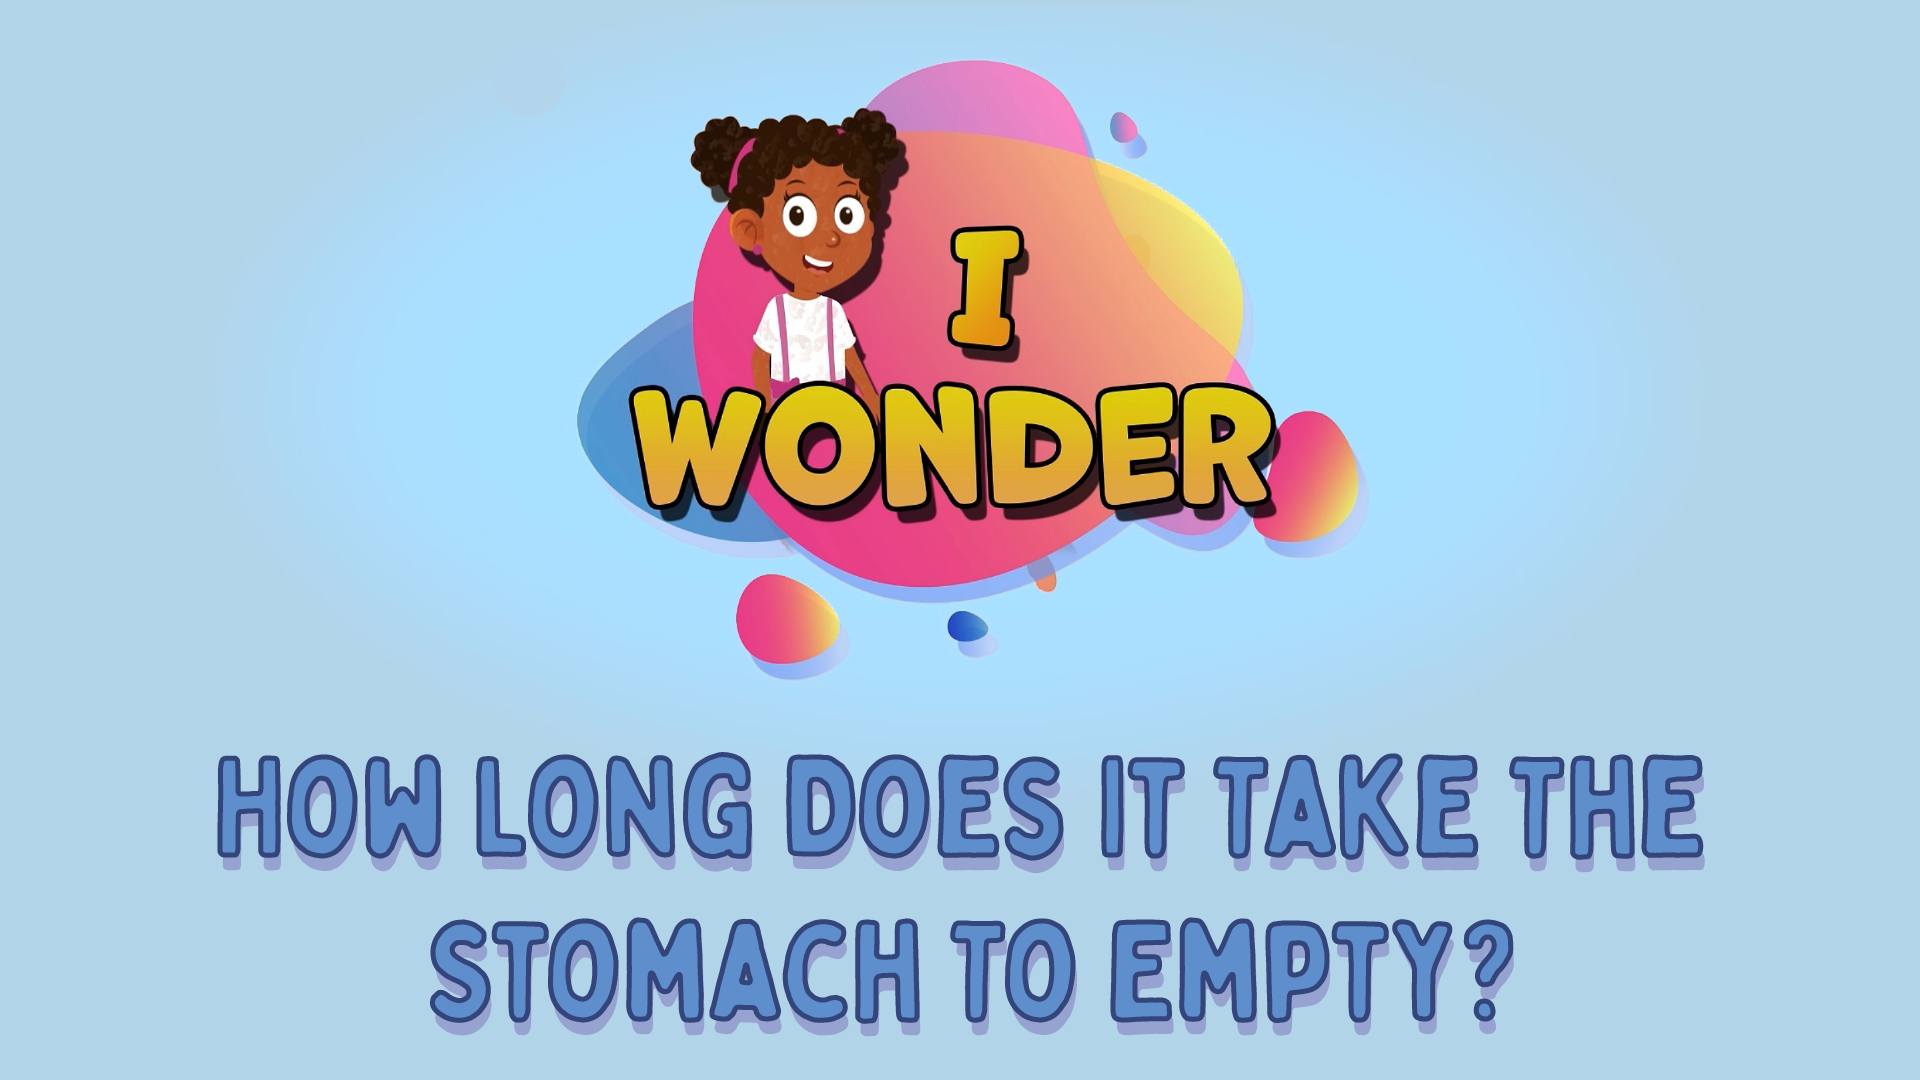 How Long Does It Take The Stomach To Empty?